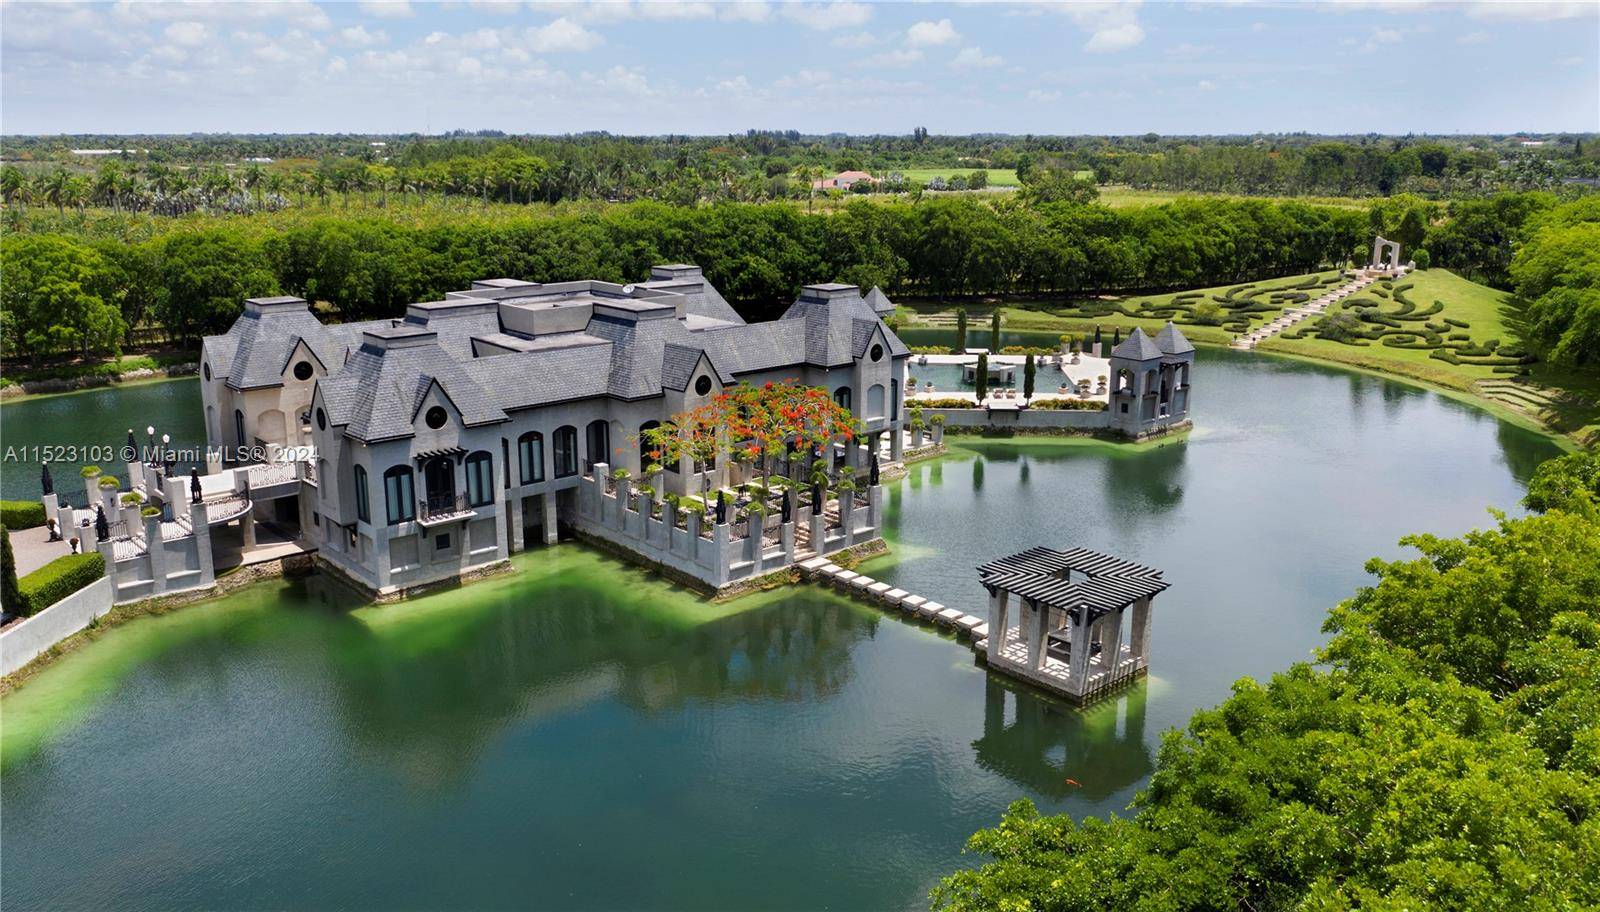 Experience Château Artisan, a masterpiece built designed by renowned Architect Charles Sieger.